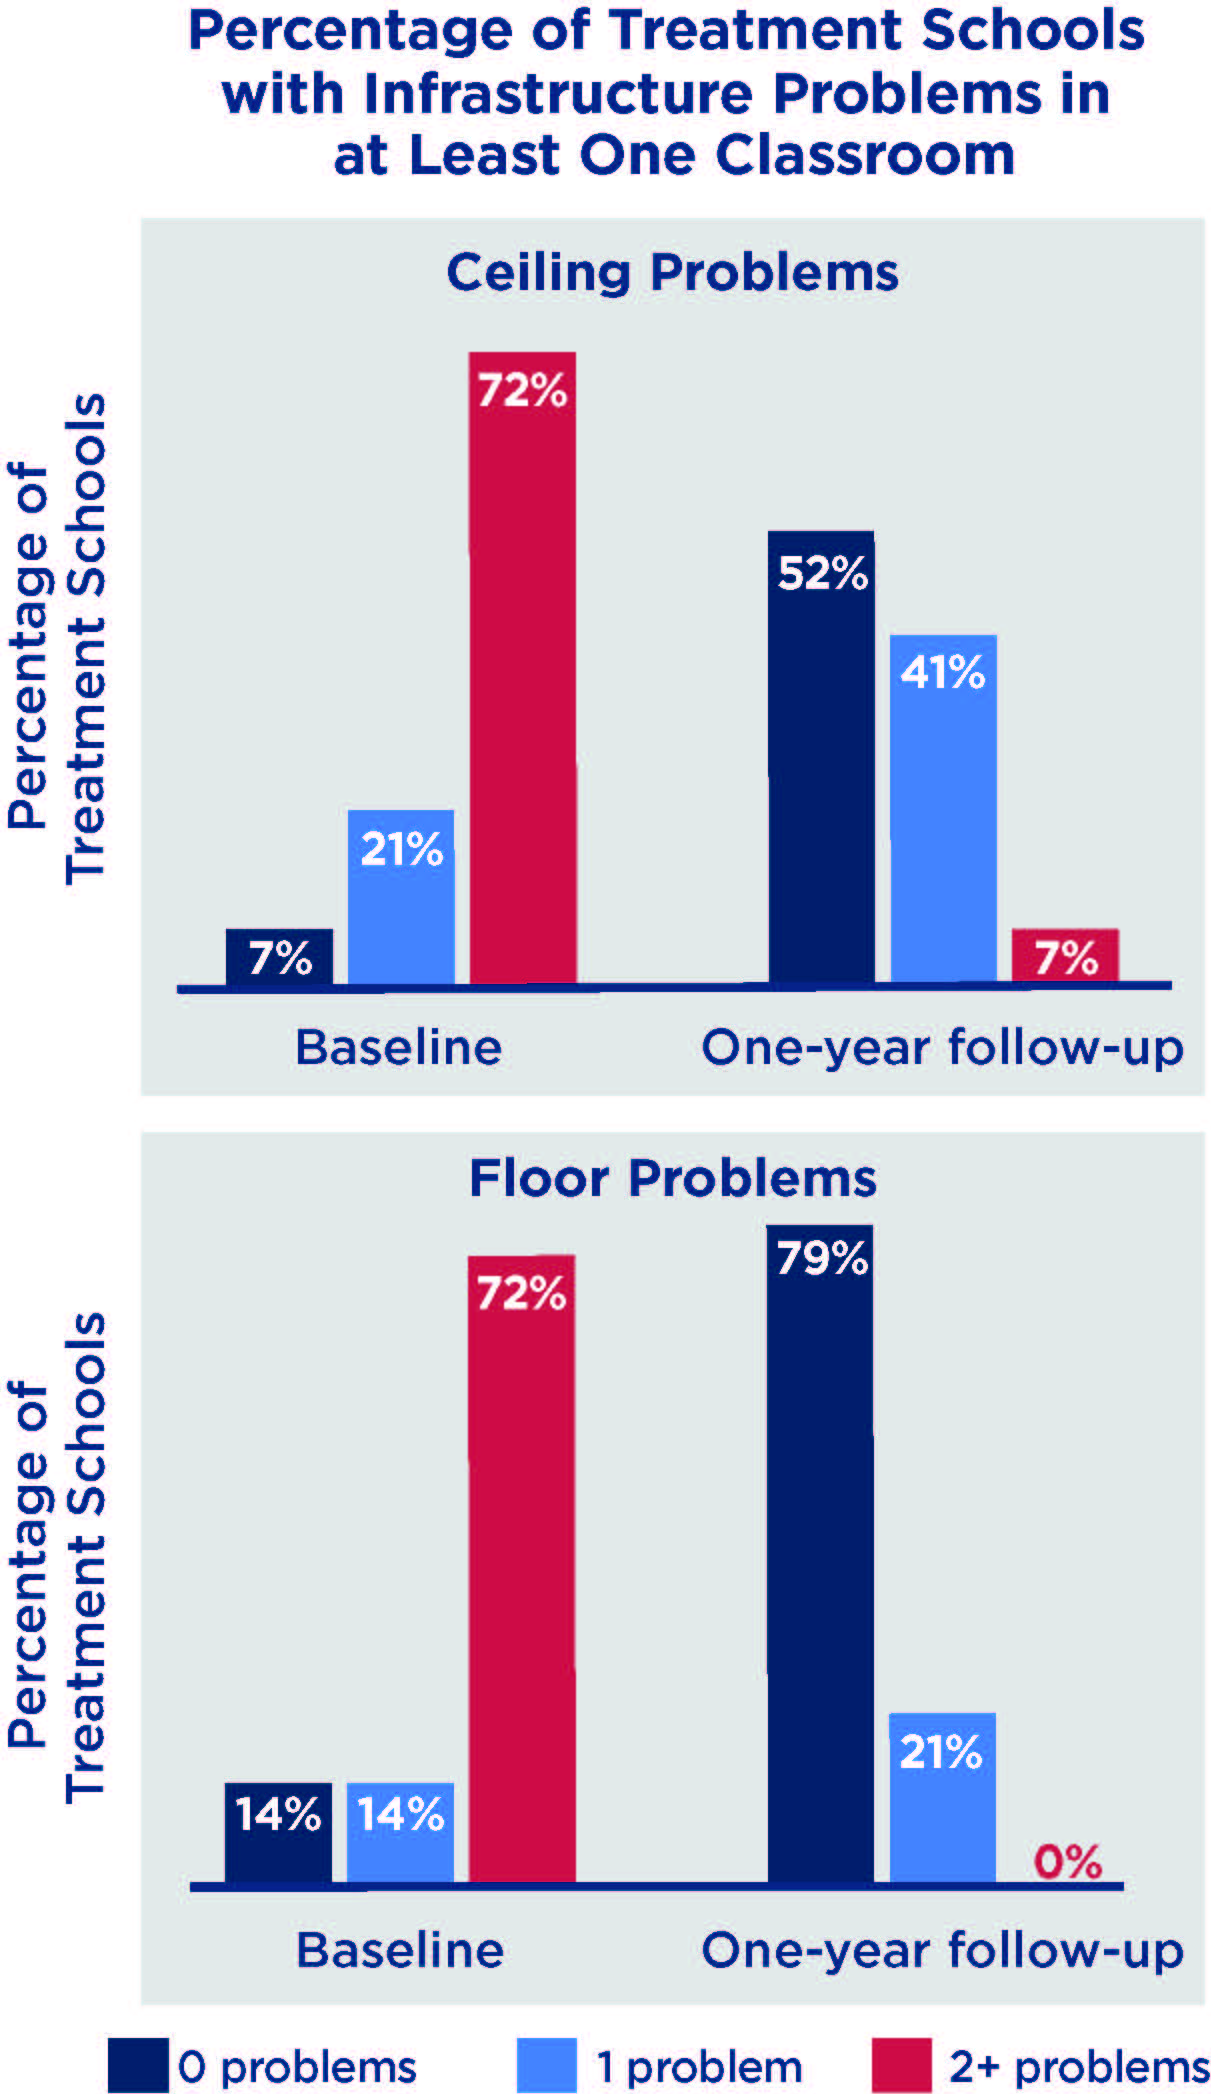 Charts of Ceiling and Floor Problems in Classrooms